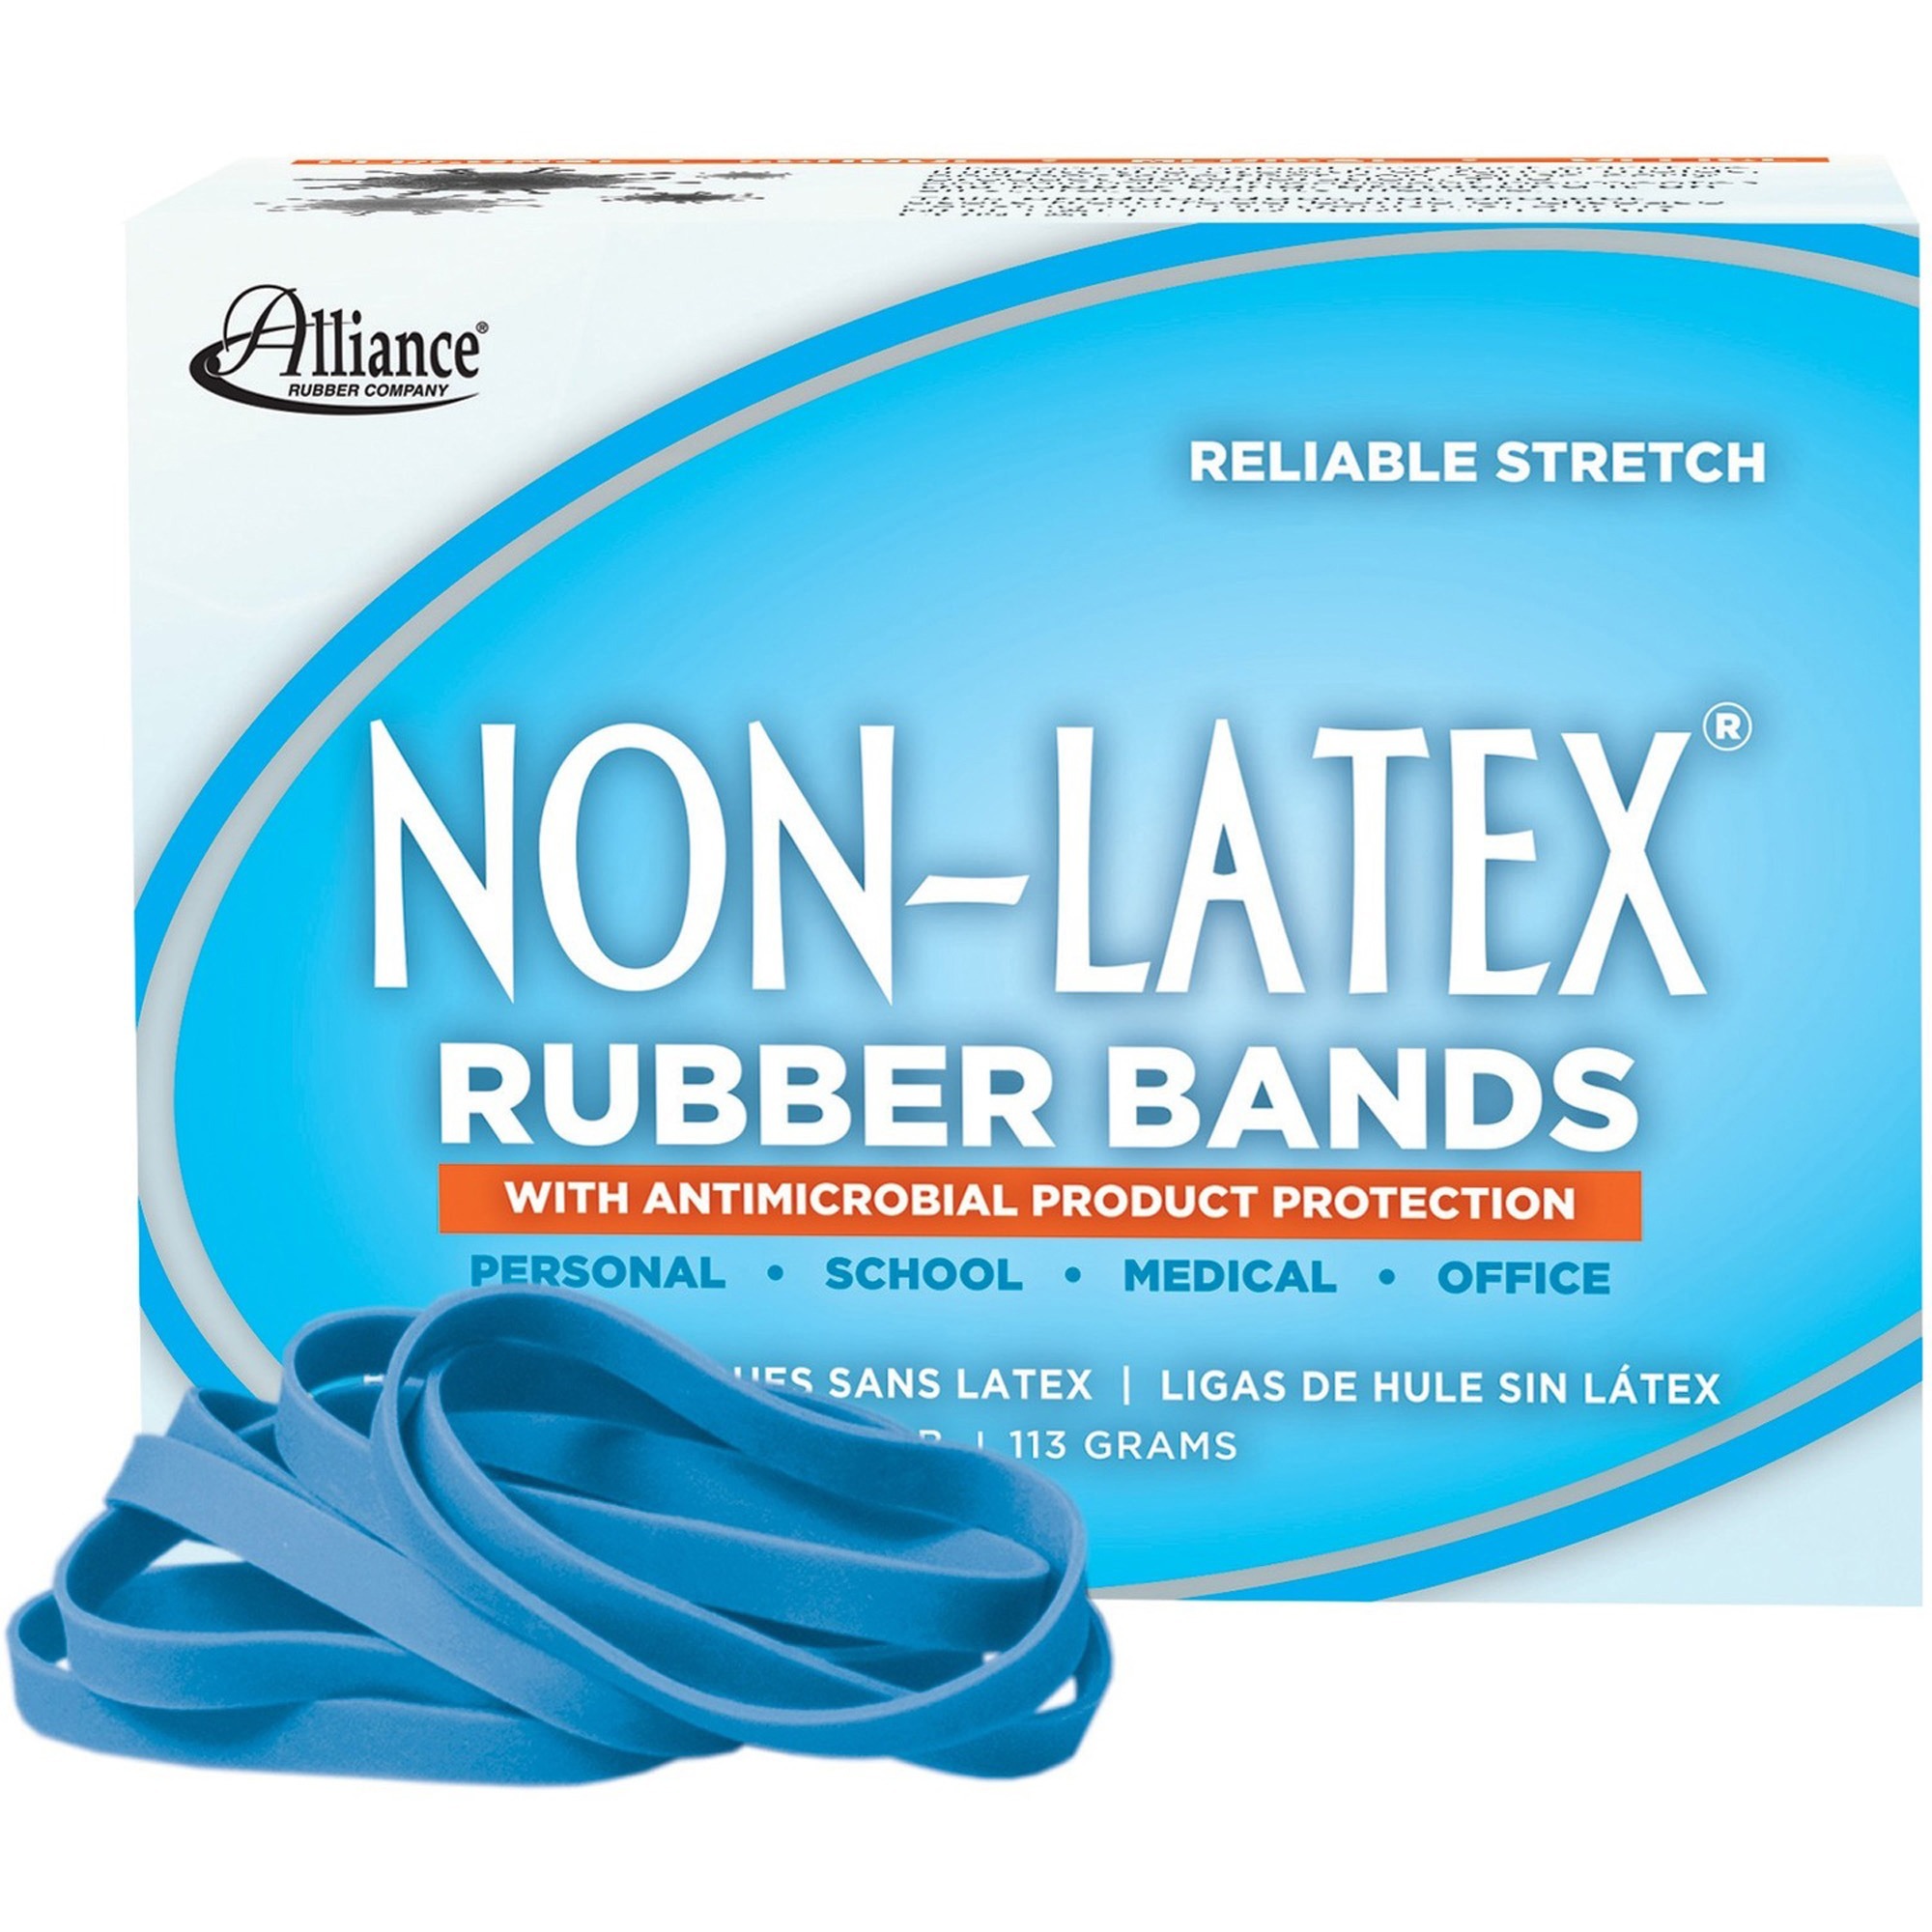 Non-Latex Rubber Bands with Antimicrobial Product Protection - 1 Box